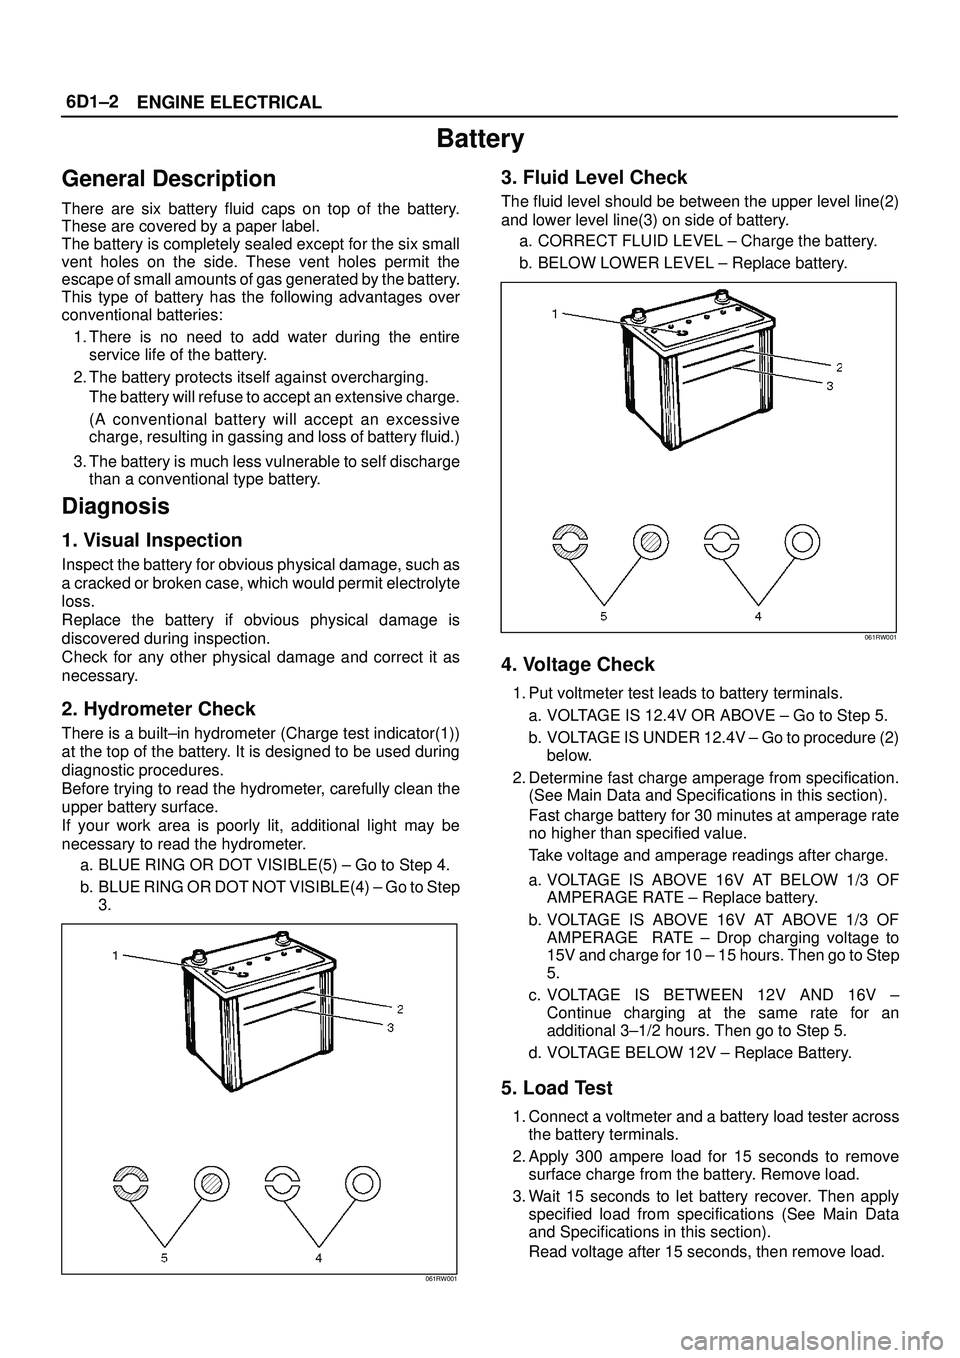 ISUZU TROOPER 1998  Service Owners Manual 6D1±2
ENGINE ELECTRICAL
Battery
General Description
There are six battery fluid caps on top of the battery.
These are covered by a paper label.
The battery is completely sealed except for the six sma